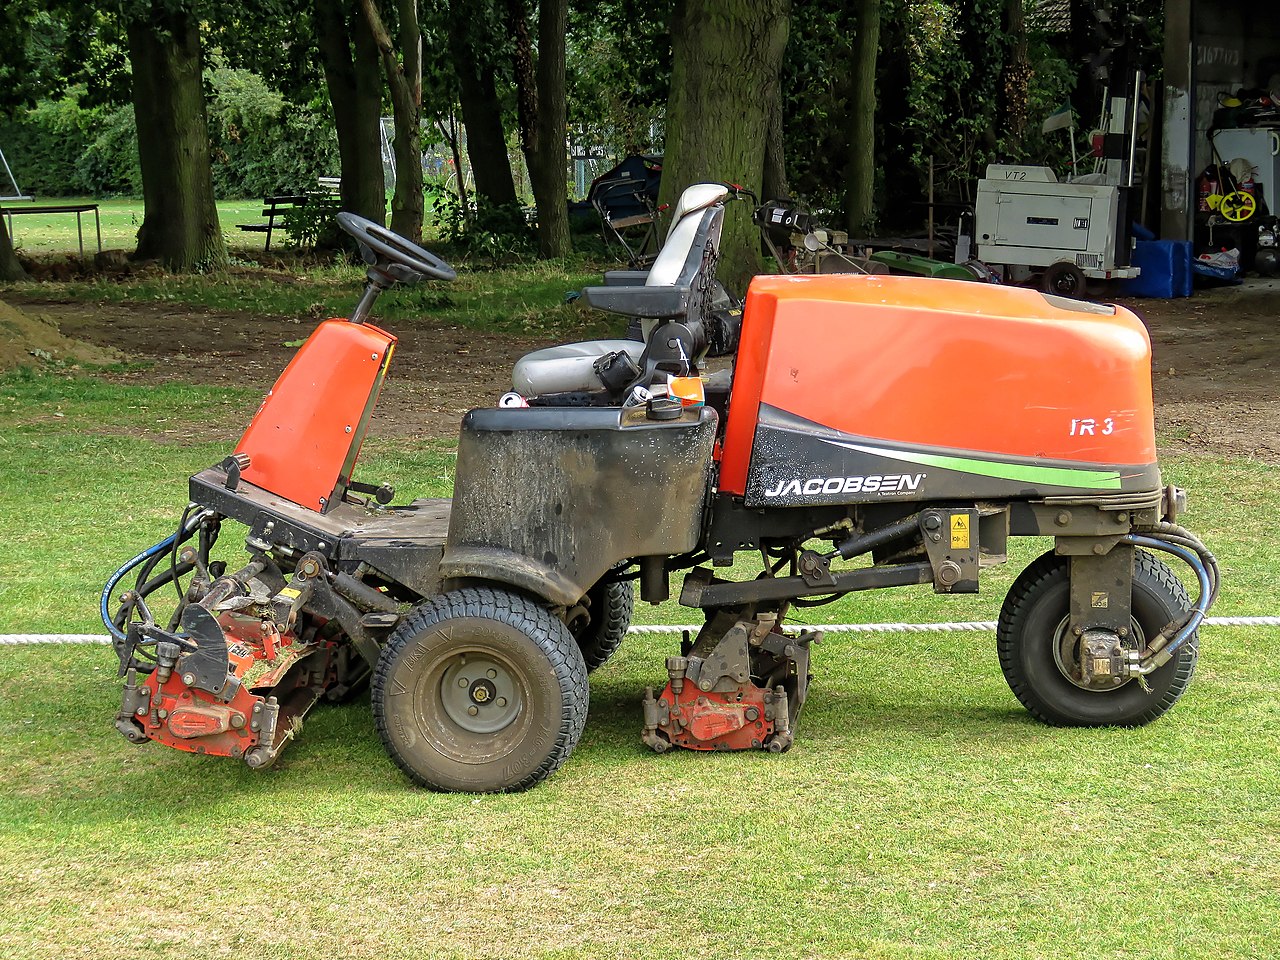 File:Jacobsen Lawn Mower At Walker Cricket Ground, Southgate, London  Wikimedia Commons